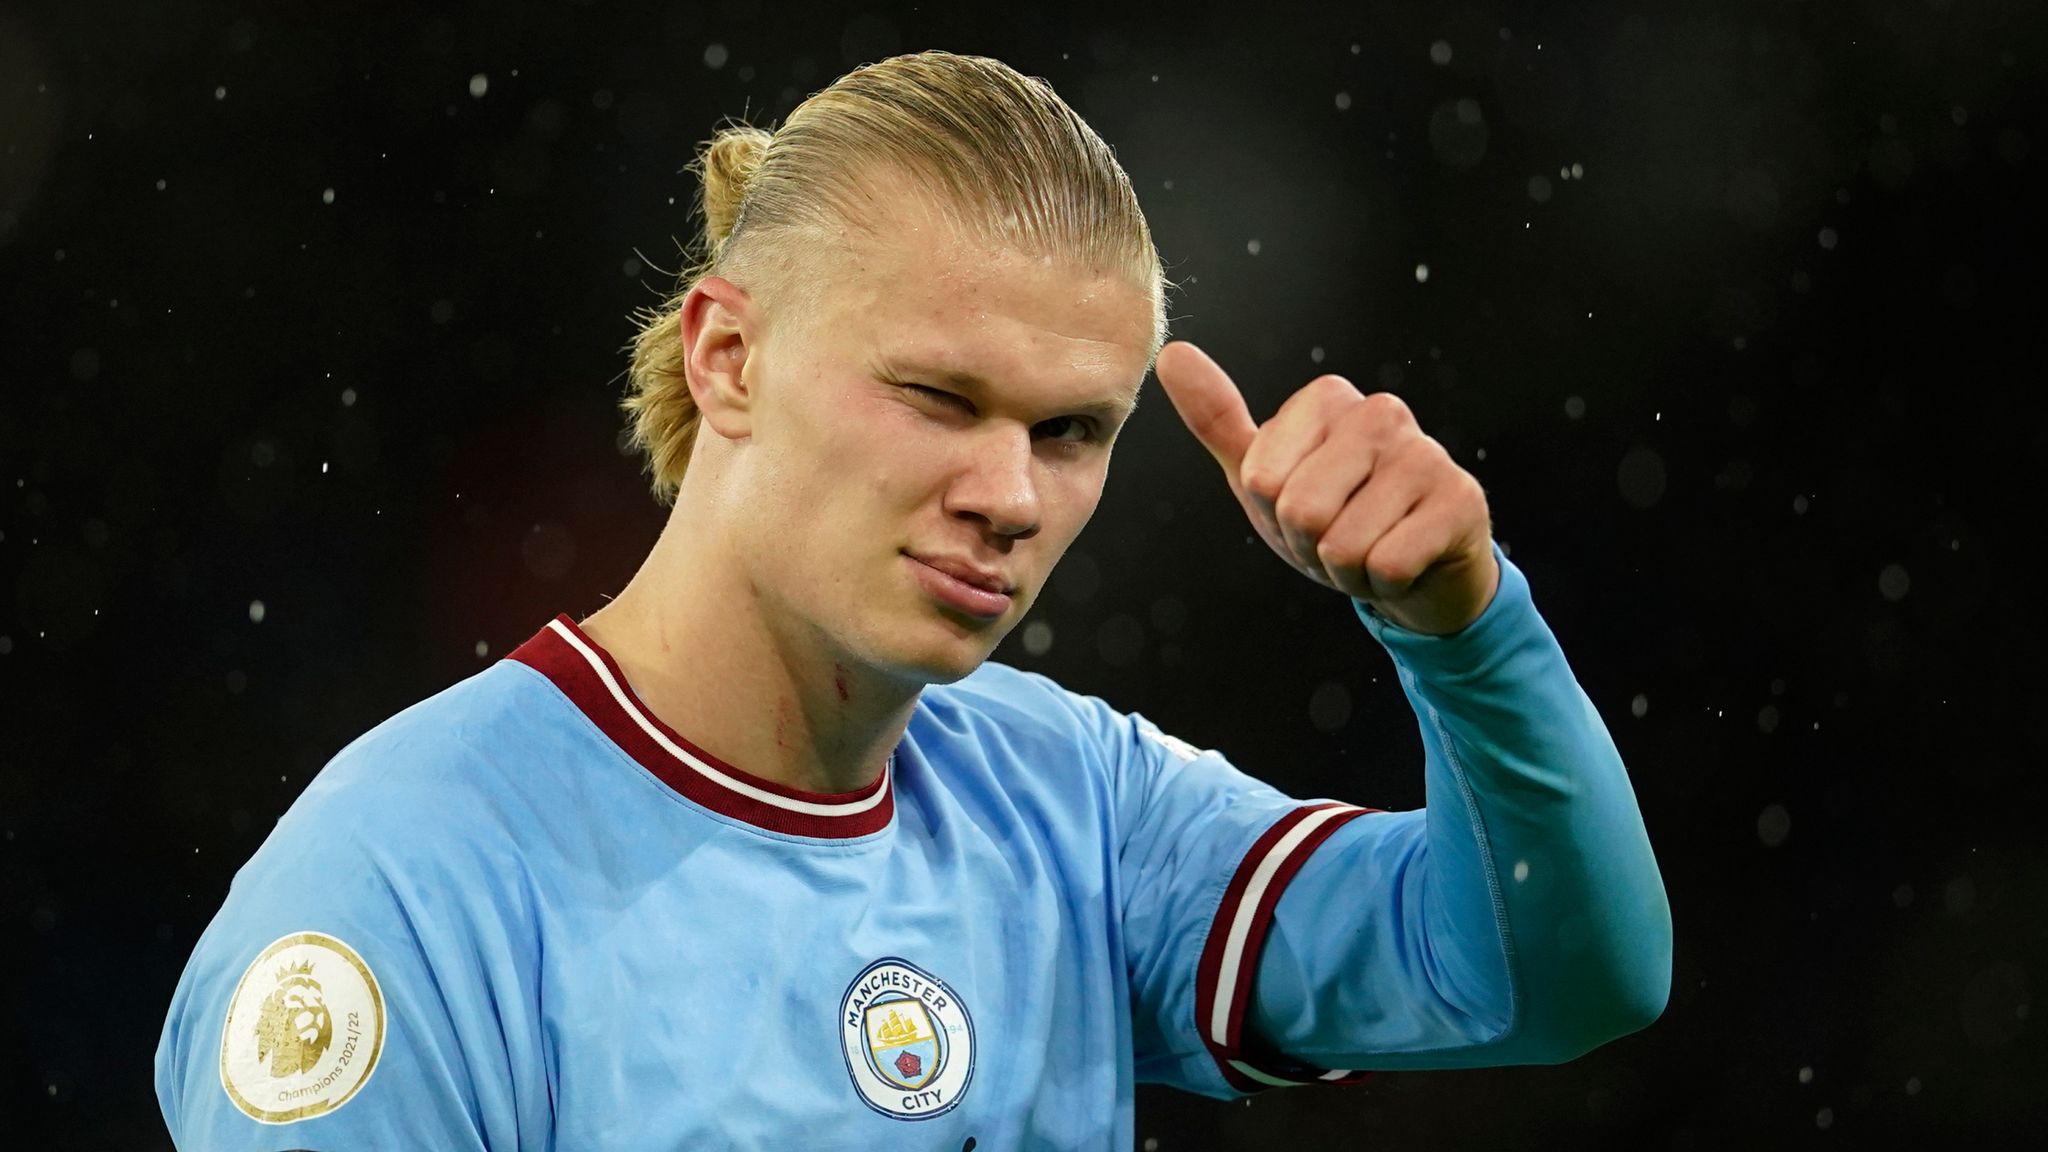 Man City refuse to confirm Erling Haaland shirt number with